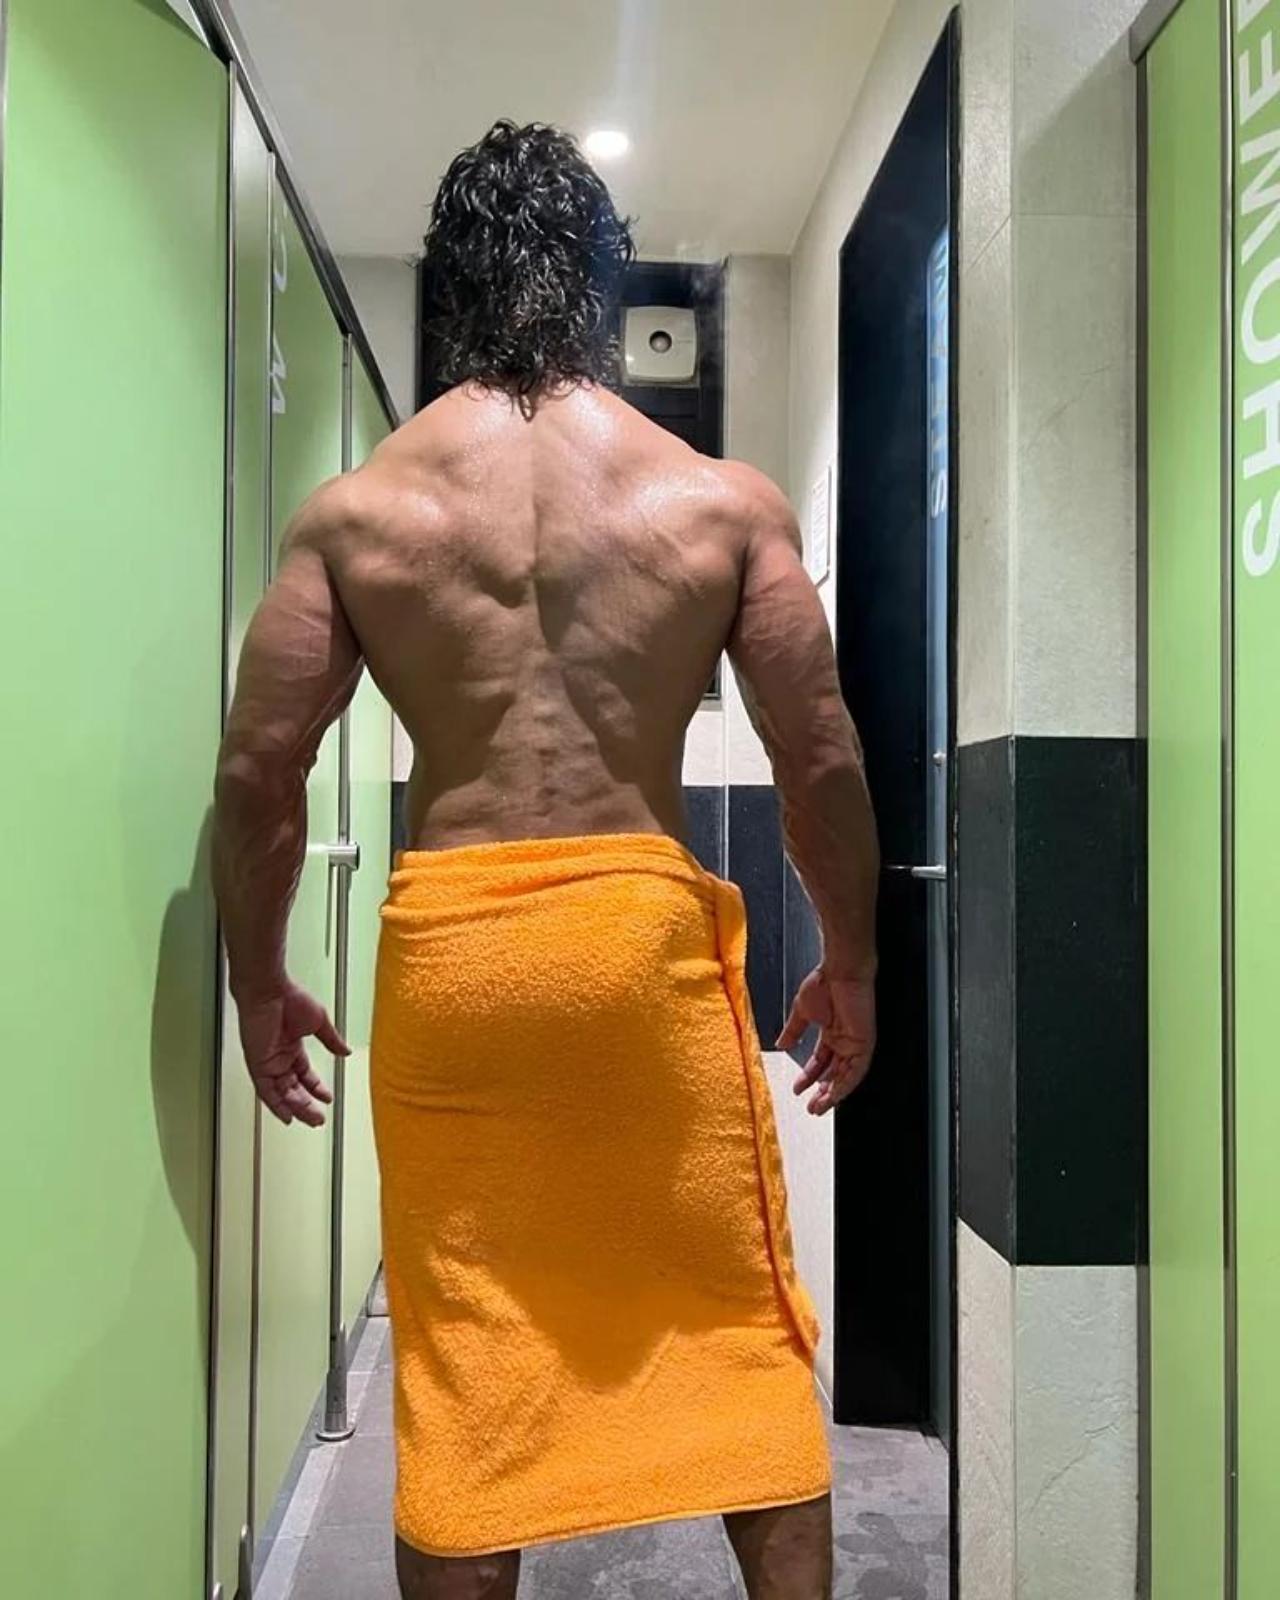 Vidyut Jammwal follows a rigorous fitness regime that combines martial arts, callisthenics, gymnastics, and weight training. To maintain his fitness level, Vidyut follows a strict diet that includes a balance of proteins, carbohydrates, healthy fats, and plenty of fresh fruits and vegetables. He also stays away from processed foods and sugary beverages